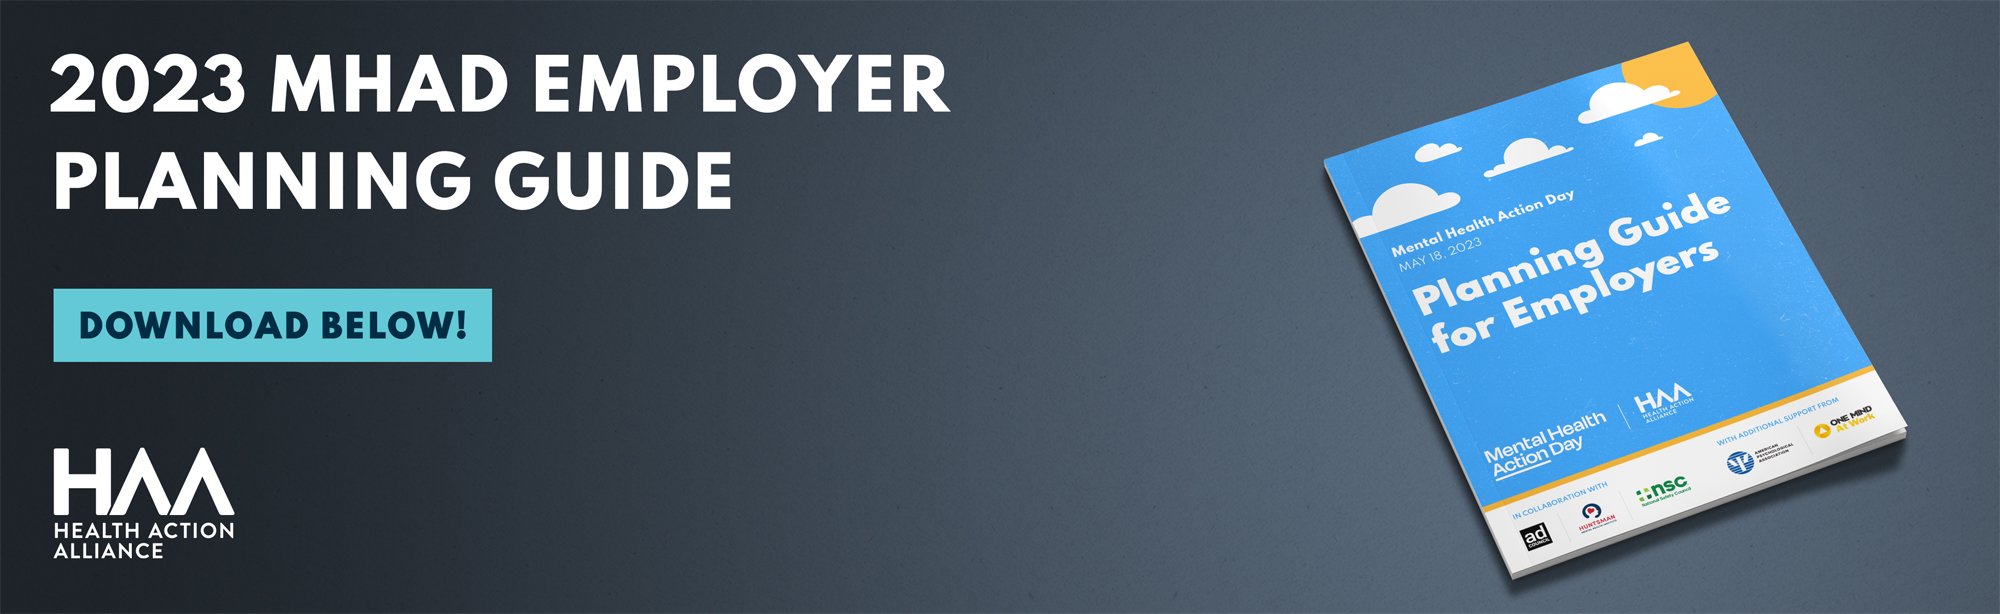 2023-MHAD-Employer-Planning-Guide-Banner